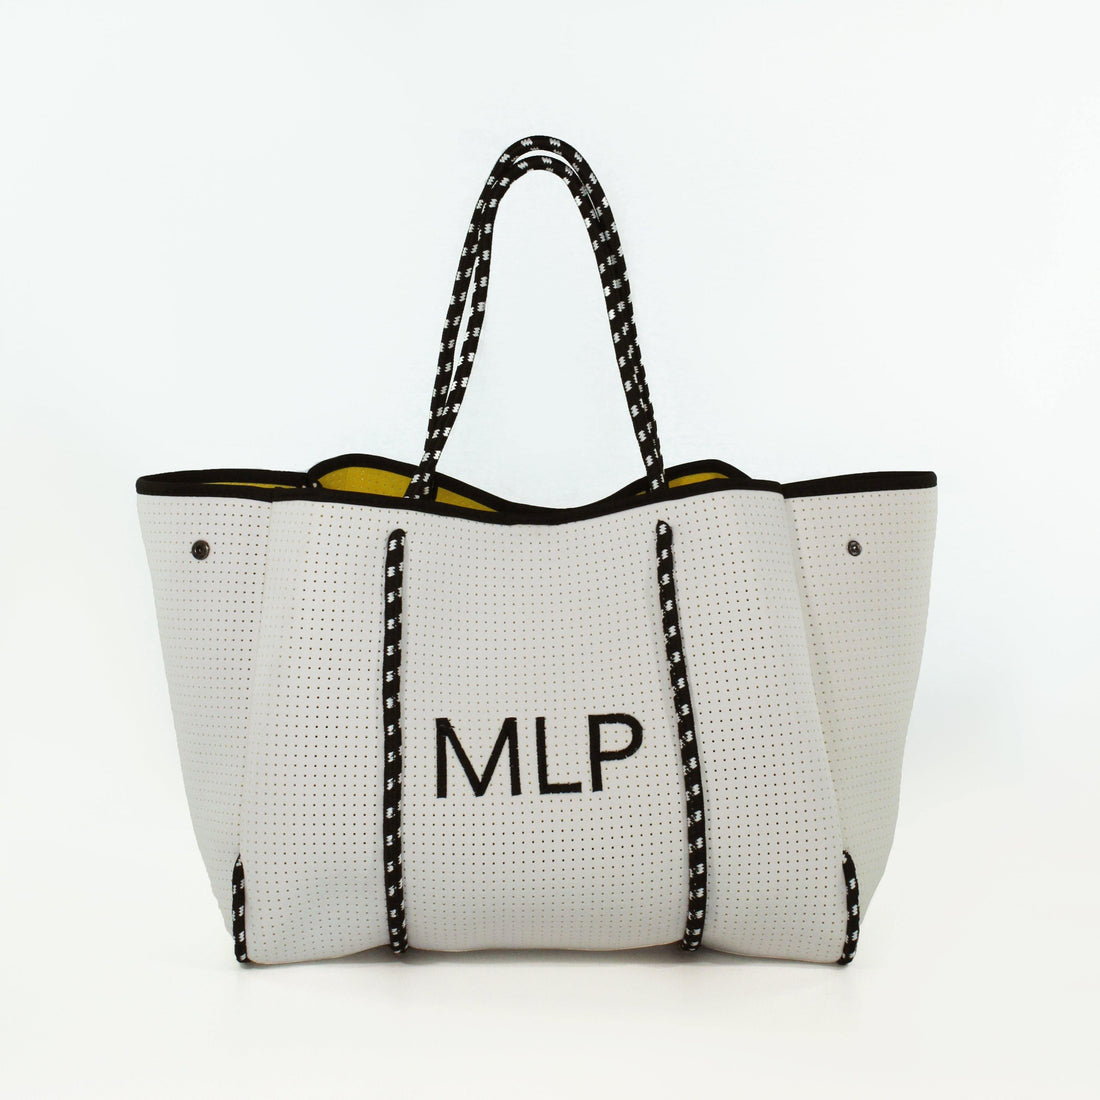 PopUps Personalization 101: The Ultimate Guide To Monogramming Your Favorite Bags! - Pop Ups Brand